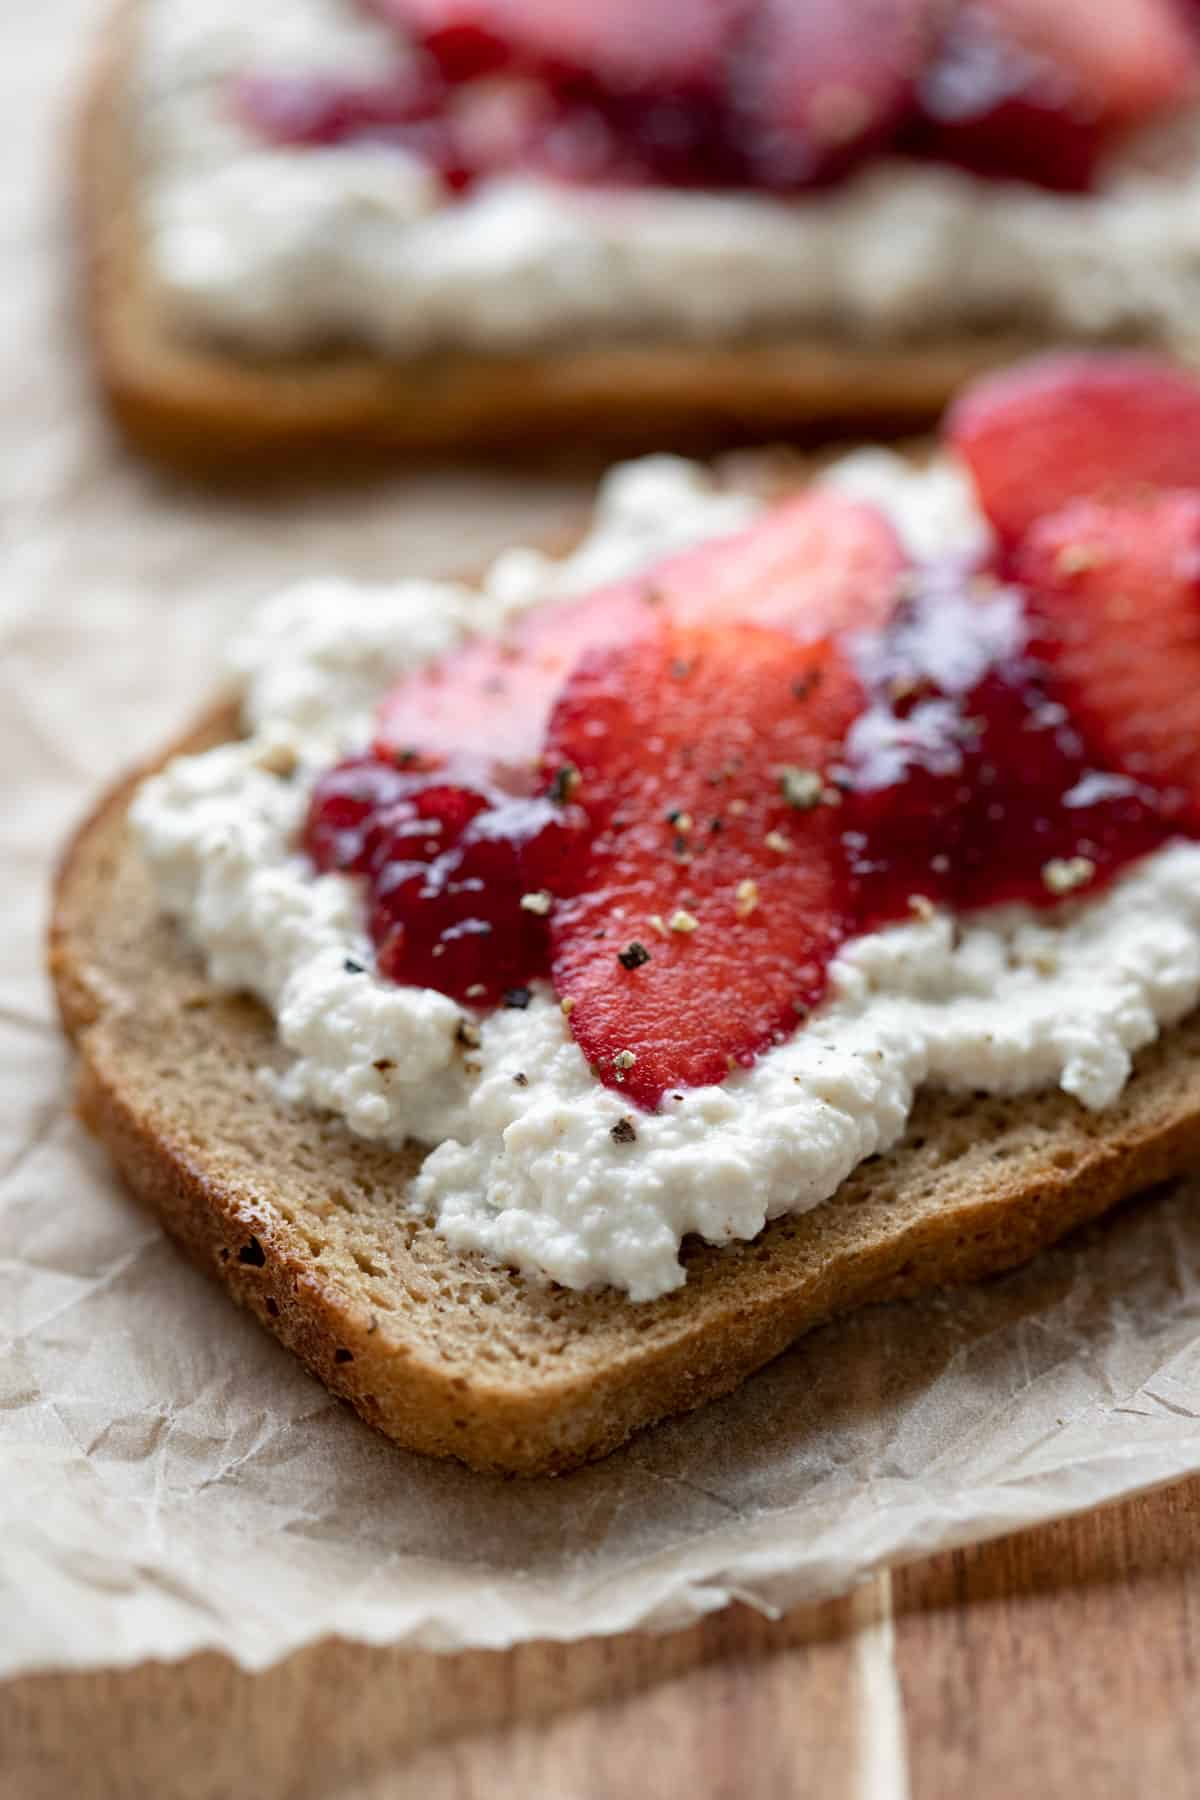 close up of dairy free cottage cheese on toast to show the curds and texture.